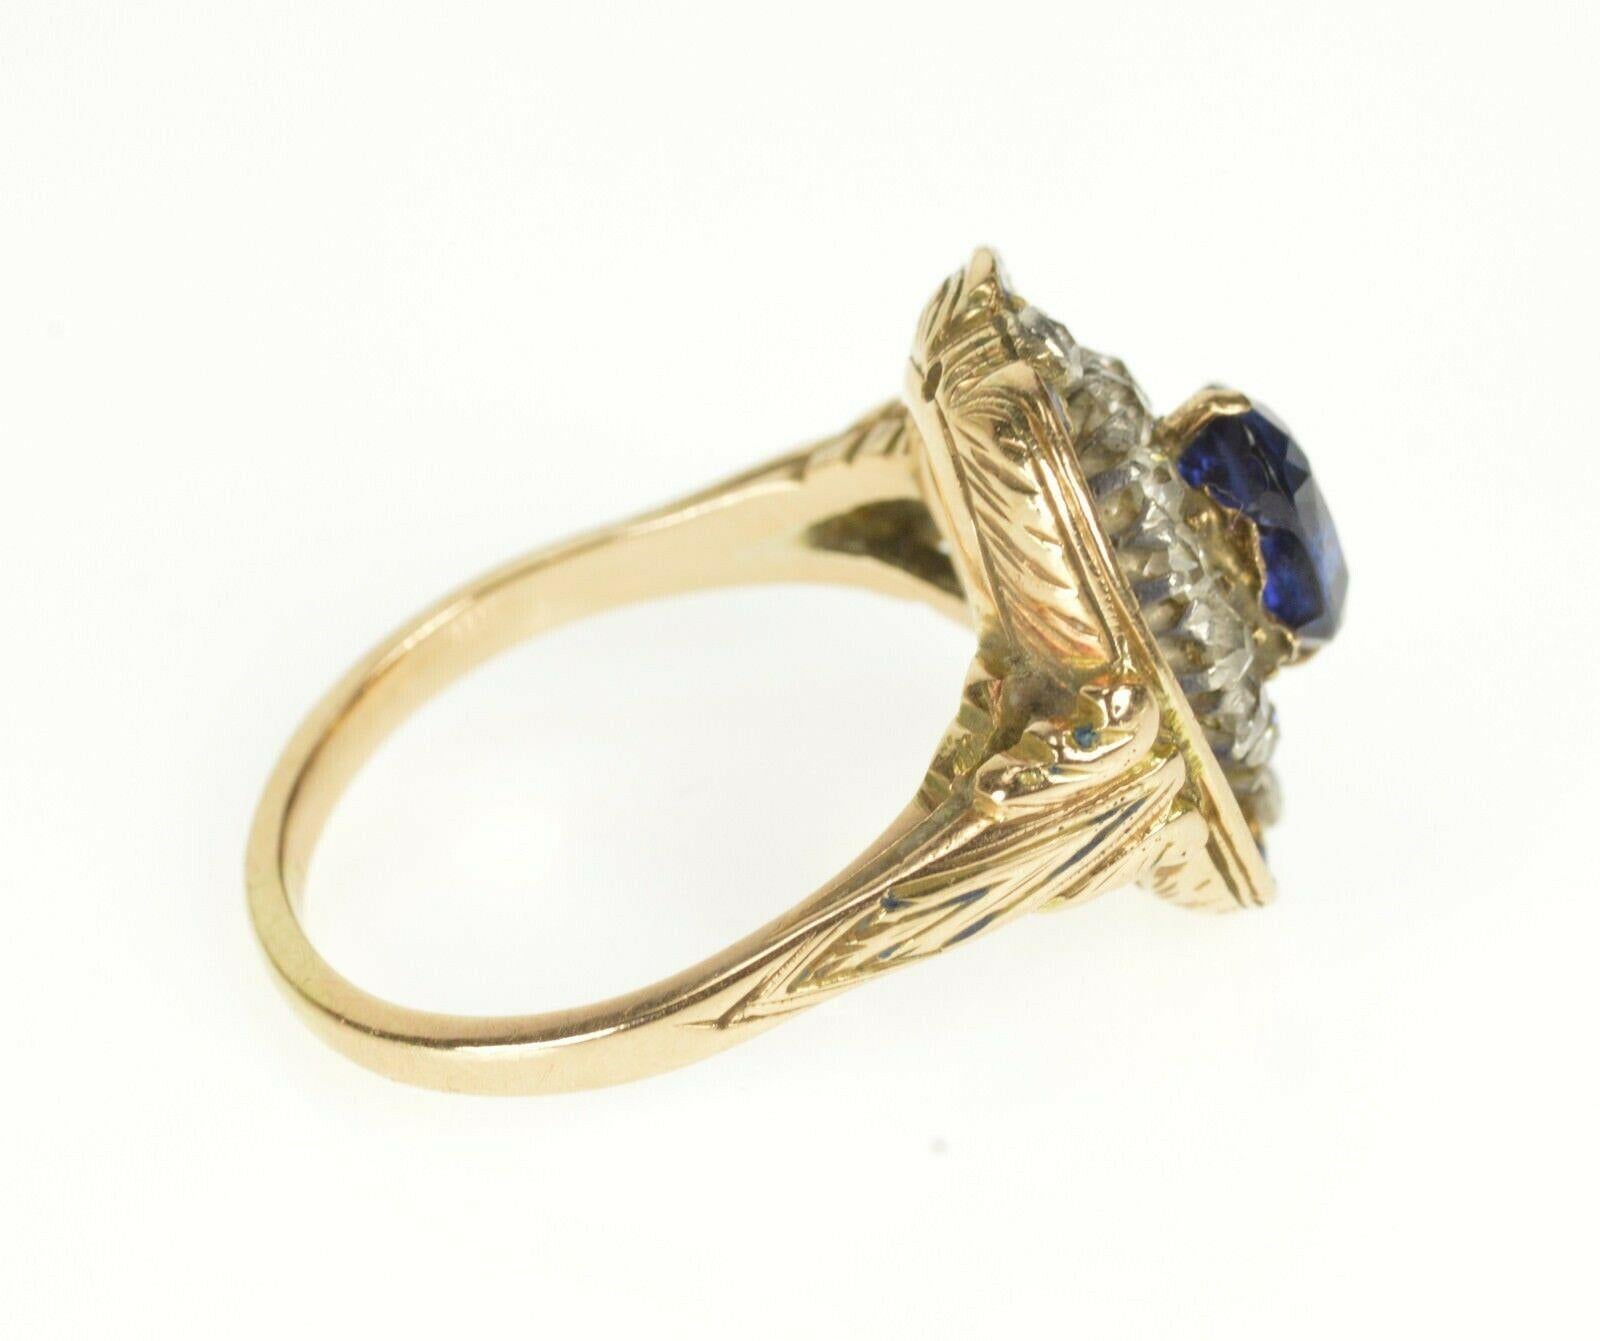 Item:  14K Sapphire Diamond Halo Blue Enamel Victorian Ring Size 7.75 Yellow Gold

Weight:  8g

Gem Stone:  14x=Rose Cut Diamond

Center Gem Stone:  1x=Natural Sapphire 7.1x5.2

Composition:  14k Gold Tested

Condition:  Estate:Good

Era:  Vintage